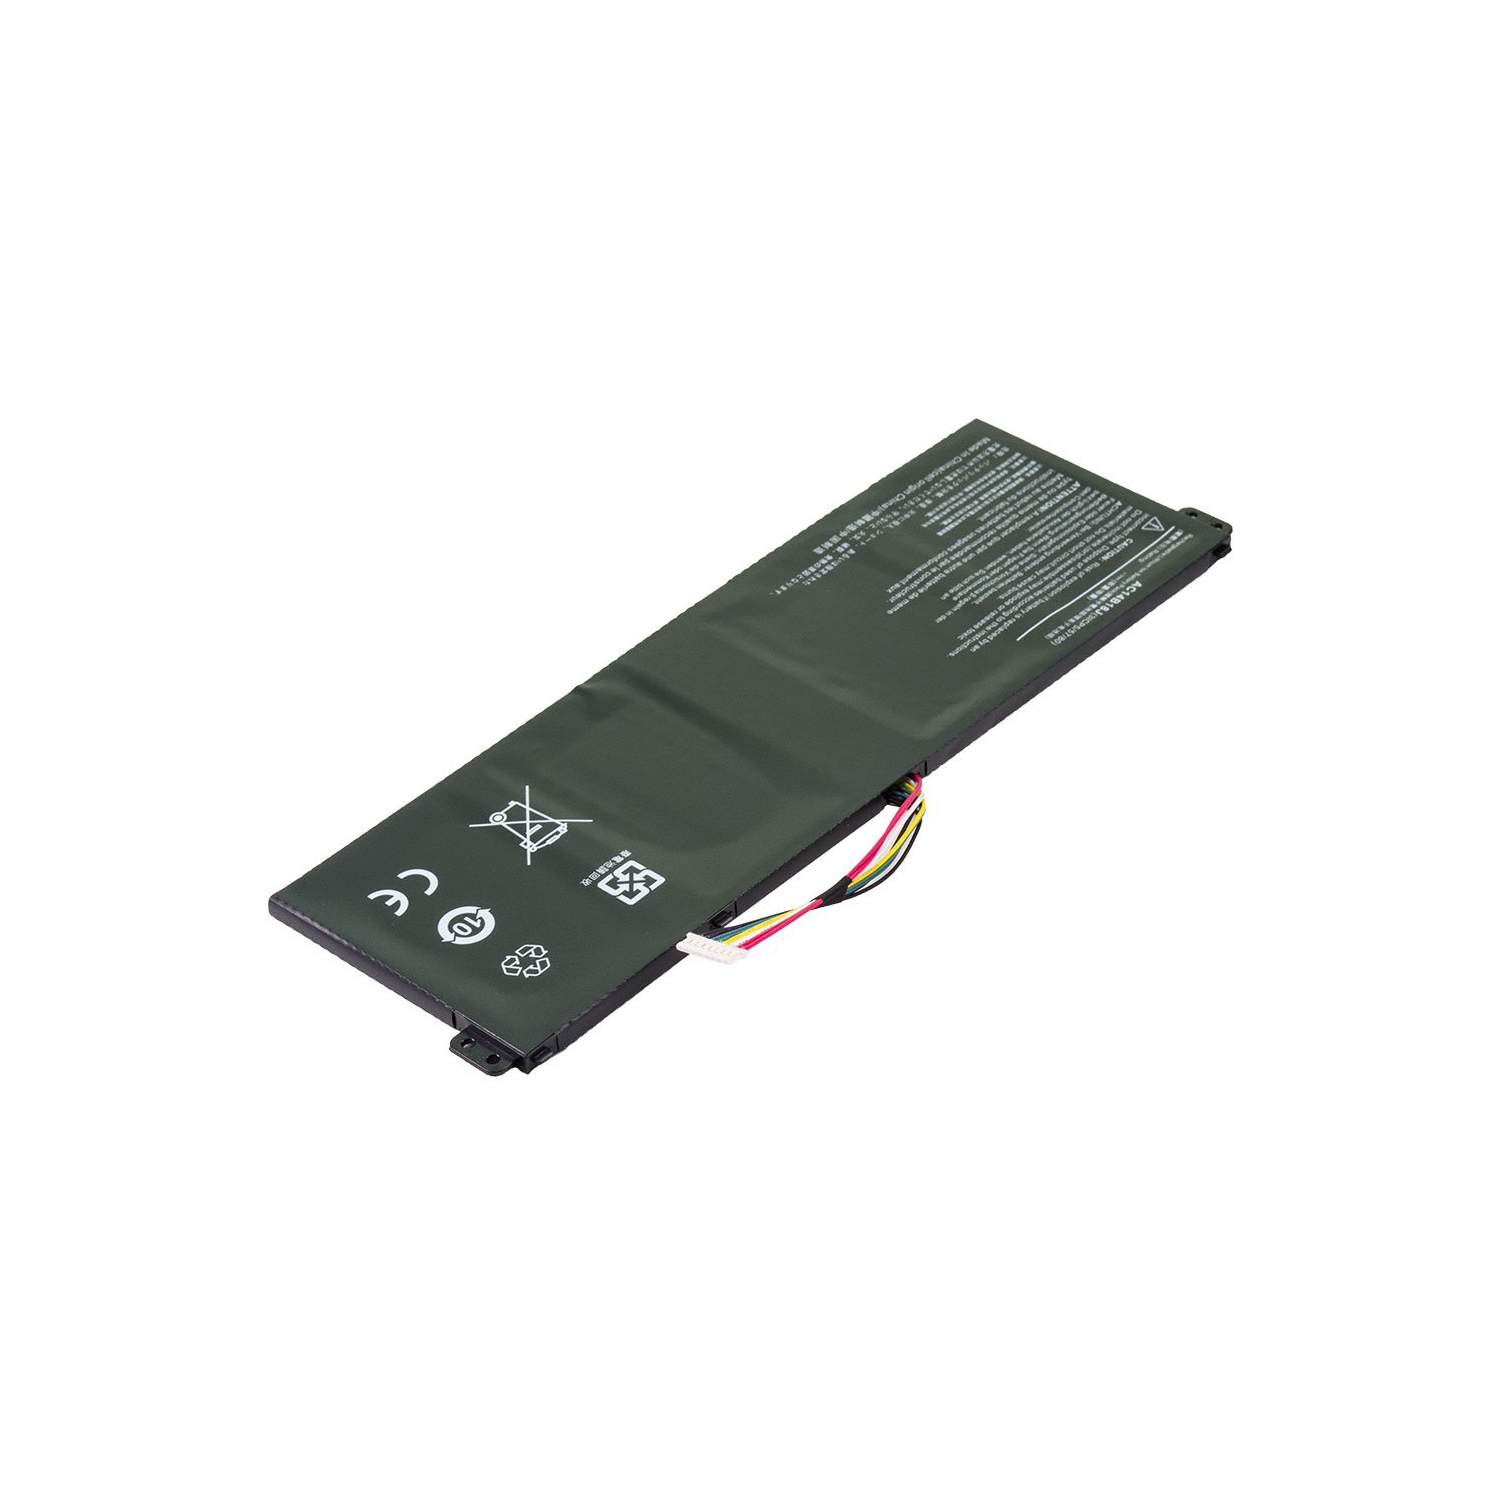 Laptop Battery Replacement for Acer Aspire ES 15 ES1-571-58V4, 3ICP5/57/80, AC14B13J, AC14B18J